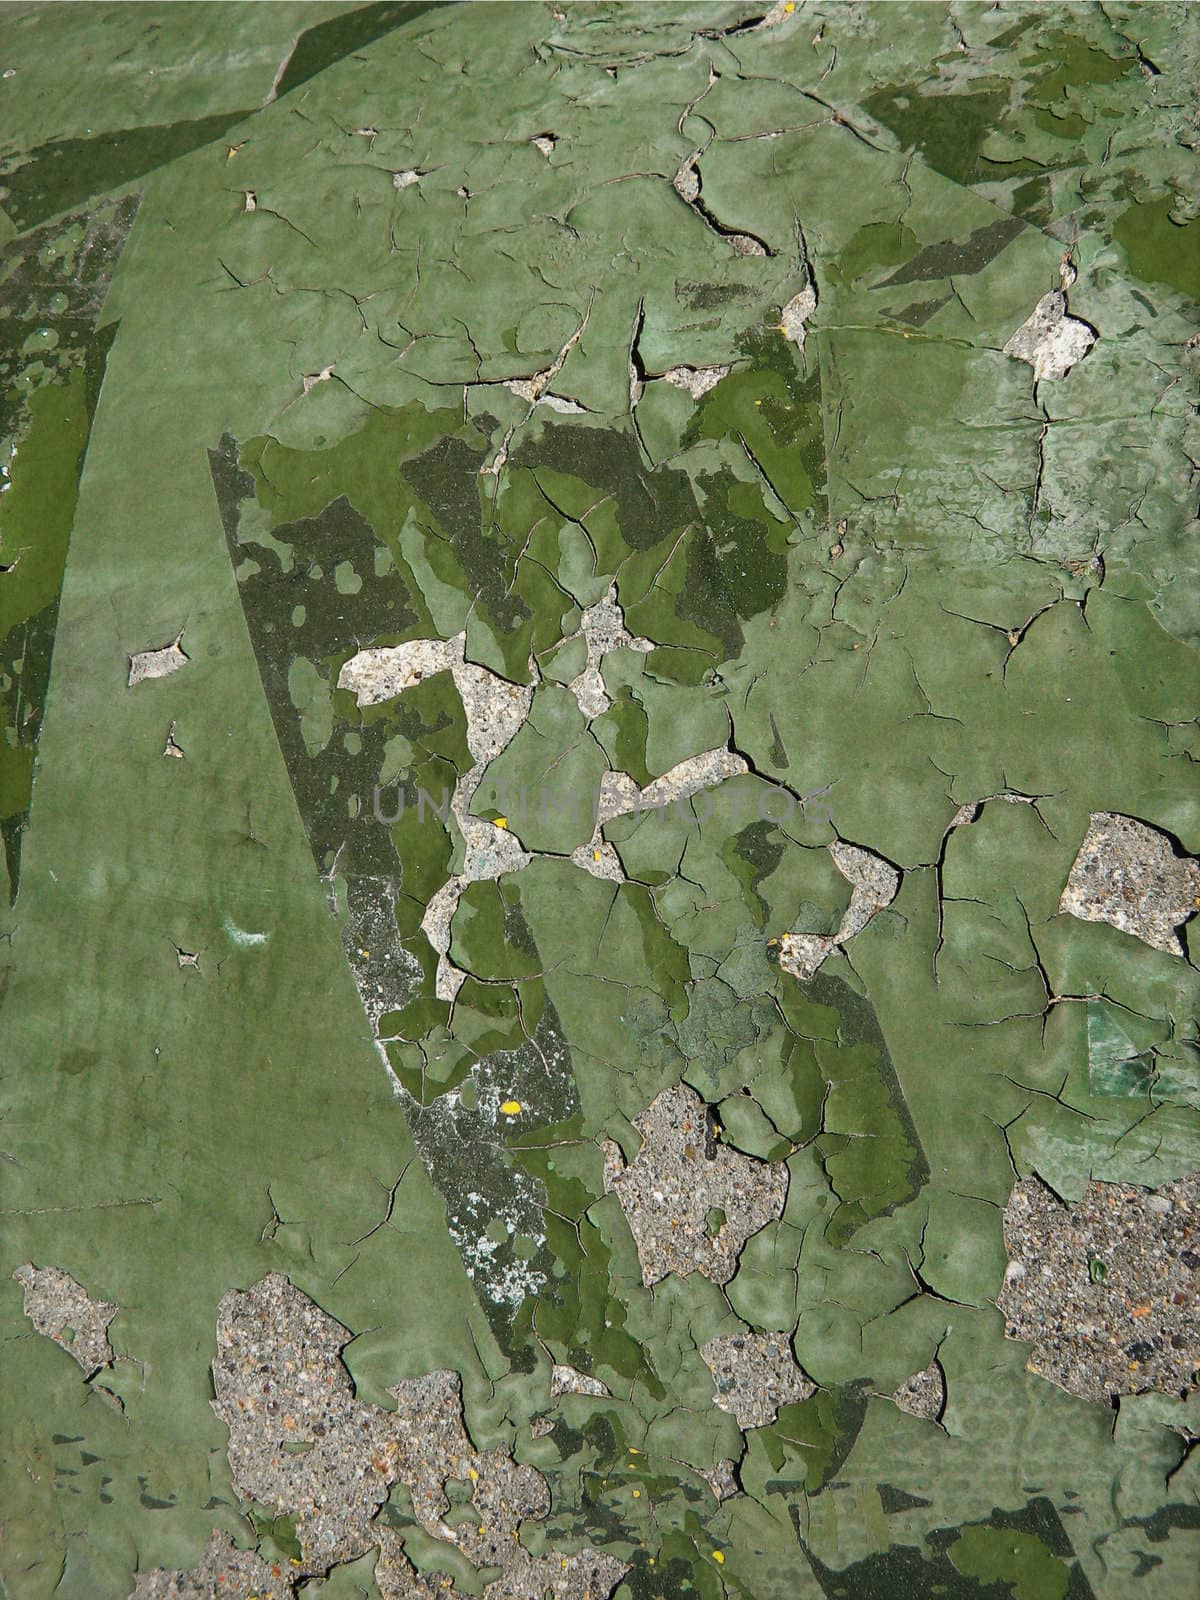 abstract green background image with interesting texture which is very useful for design purposes 